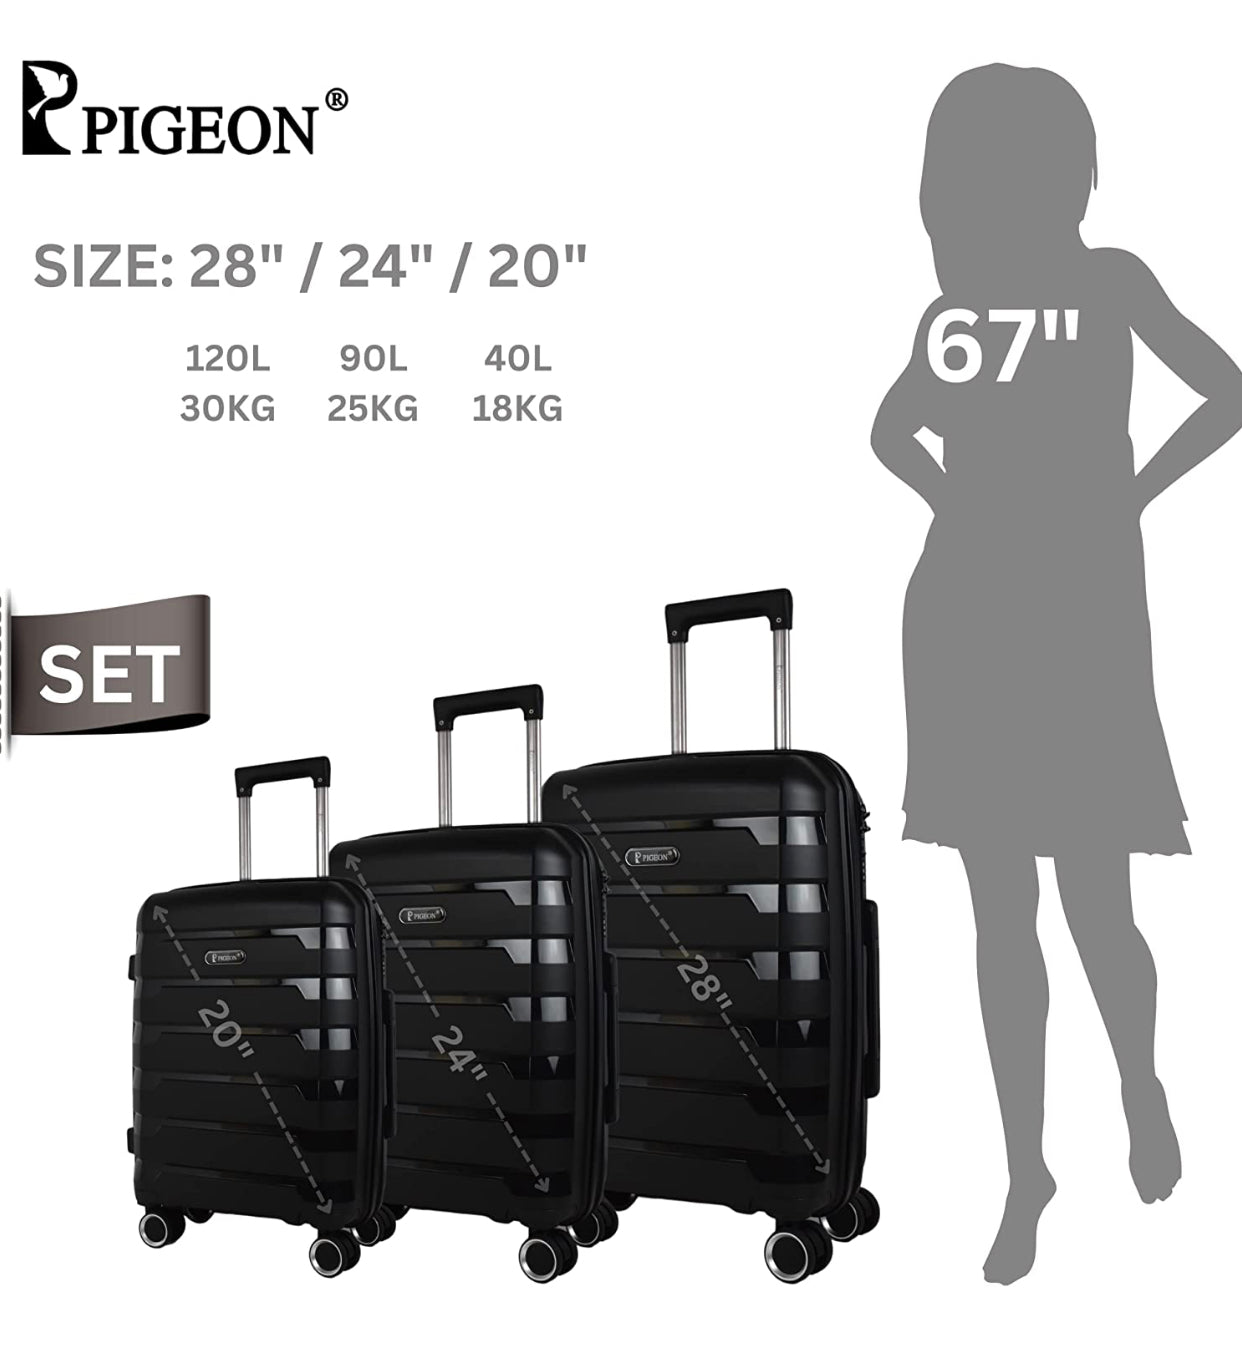 PIGEON New black Luggage 24 Inch PP with protector